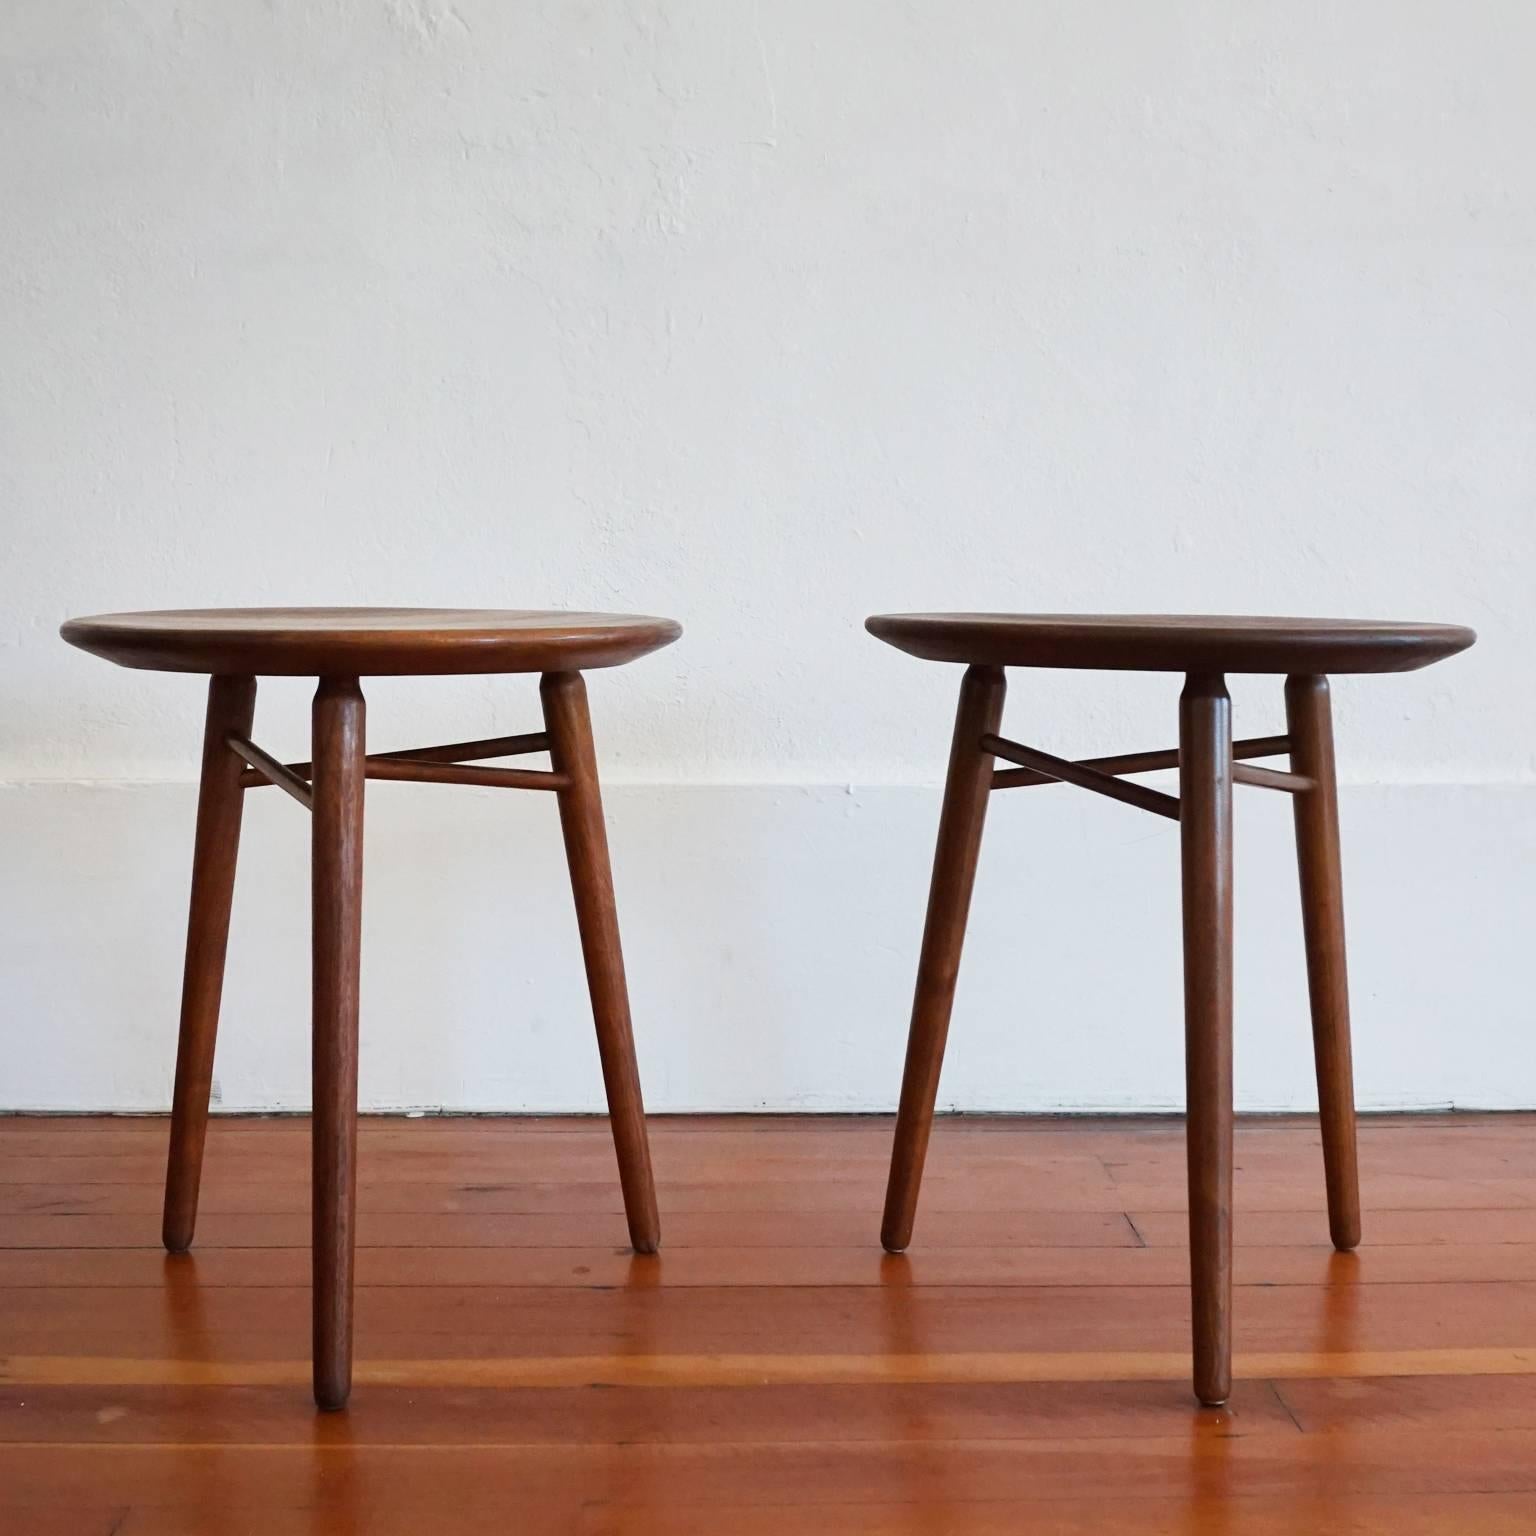 Solid walnut occasional tables or stools by Kipp Stewart and Stewart MacDougall for Glenn of California.